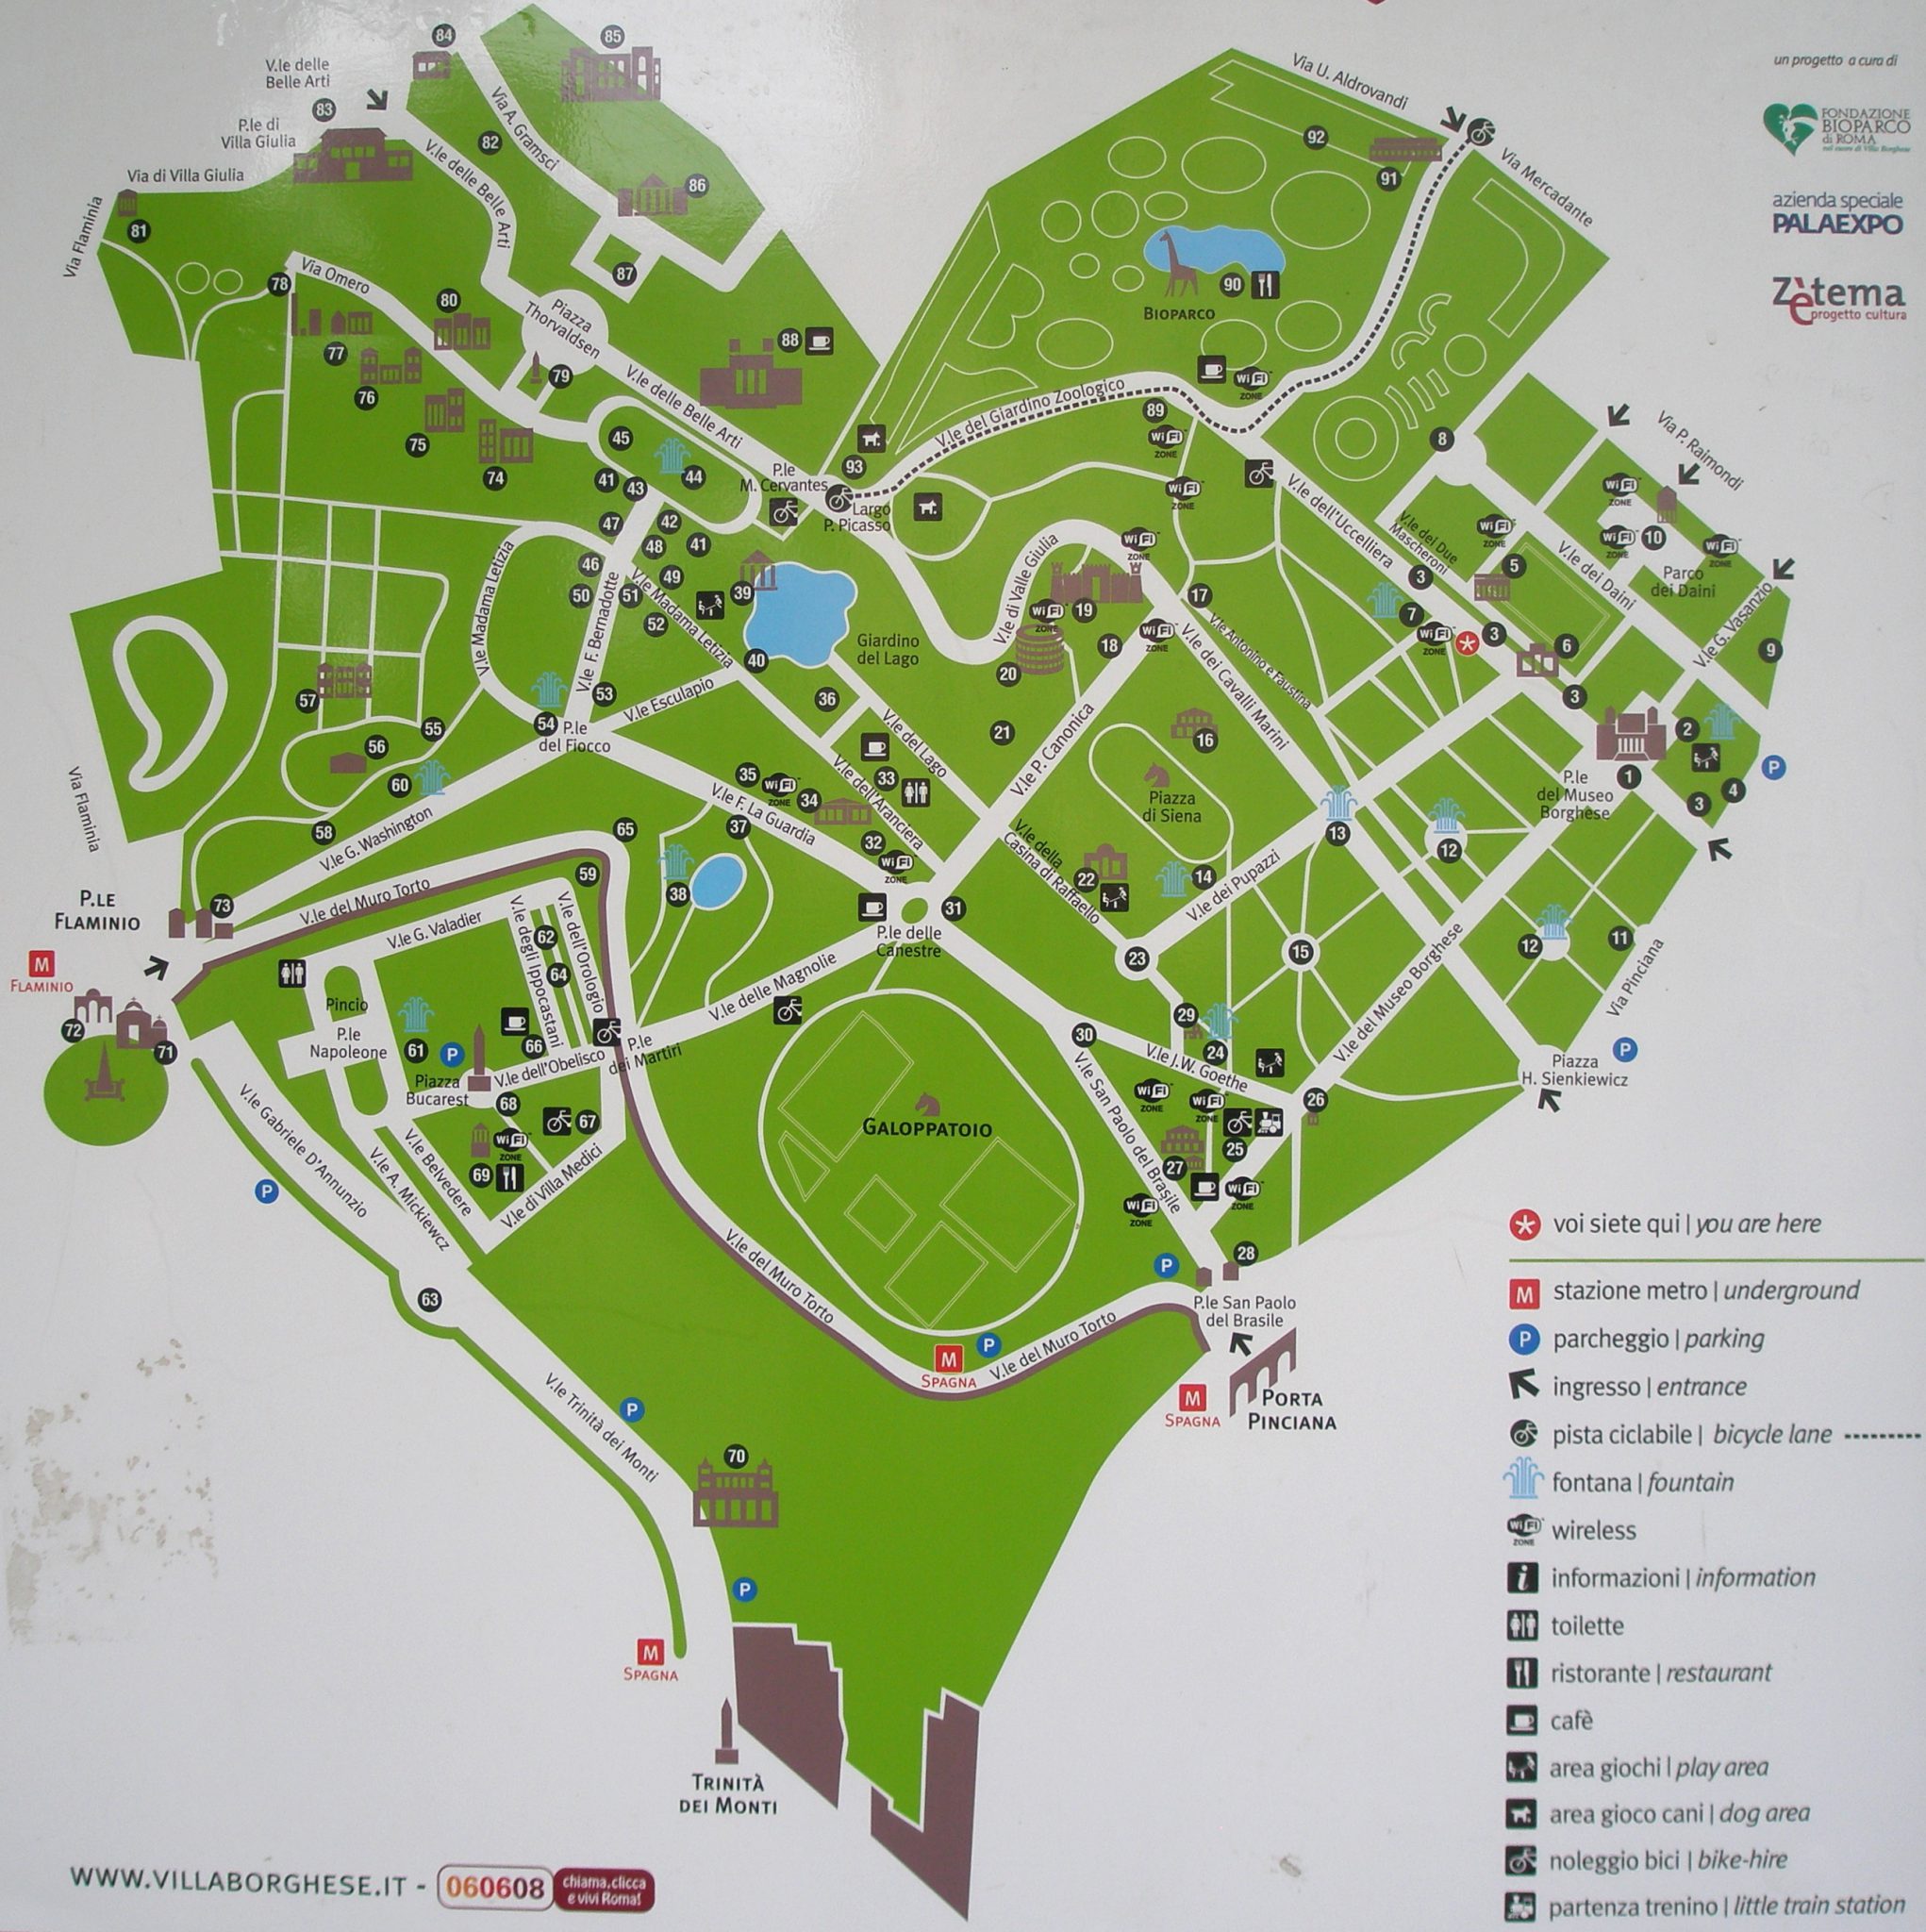 The heart-shaped Map of Villa Borghese's parklands